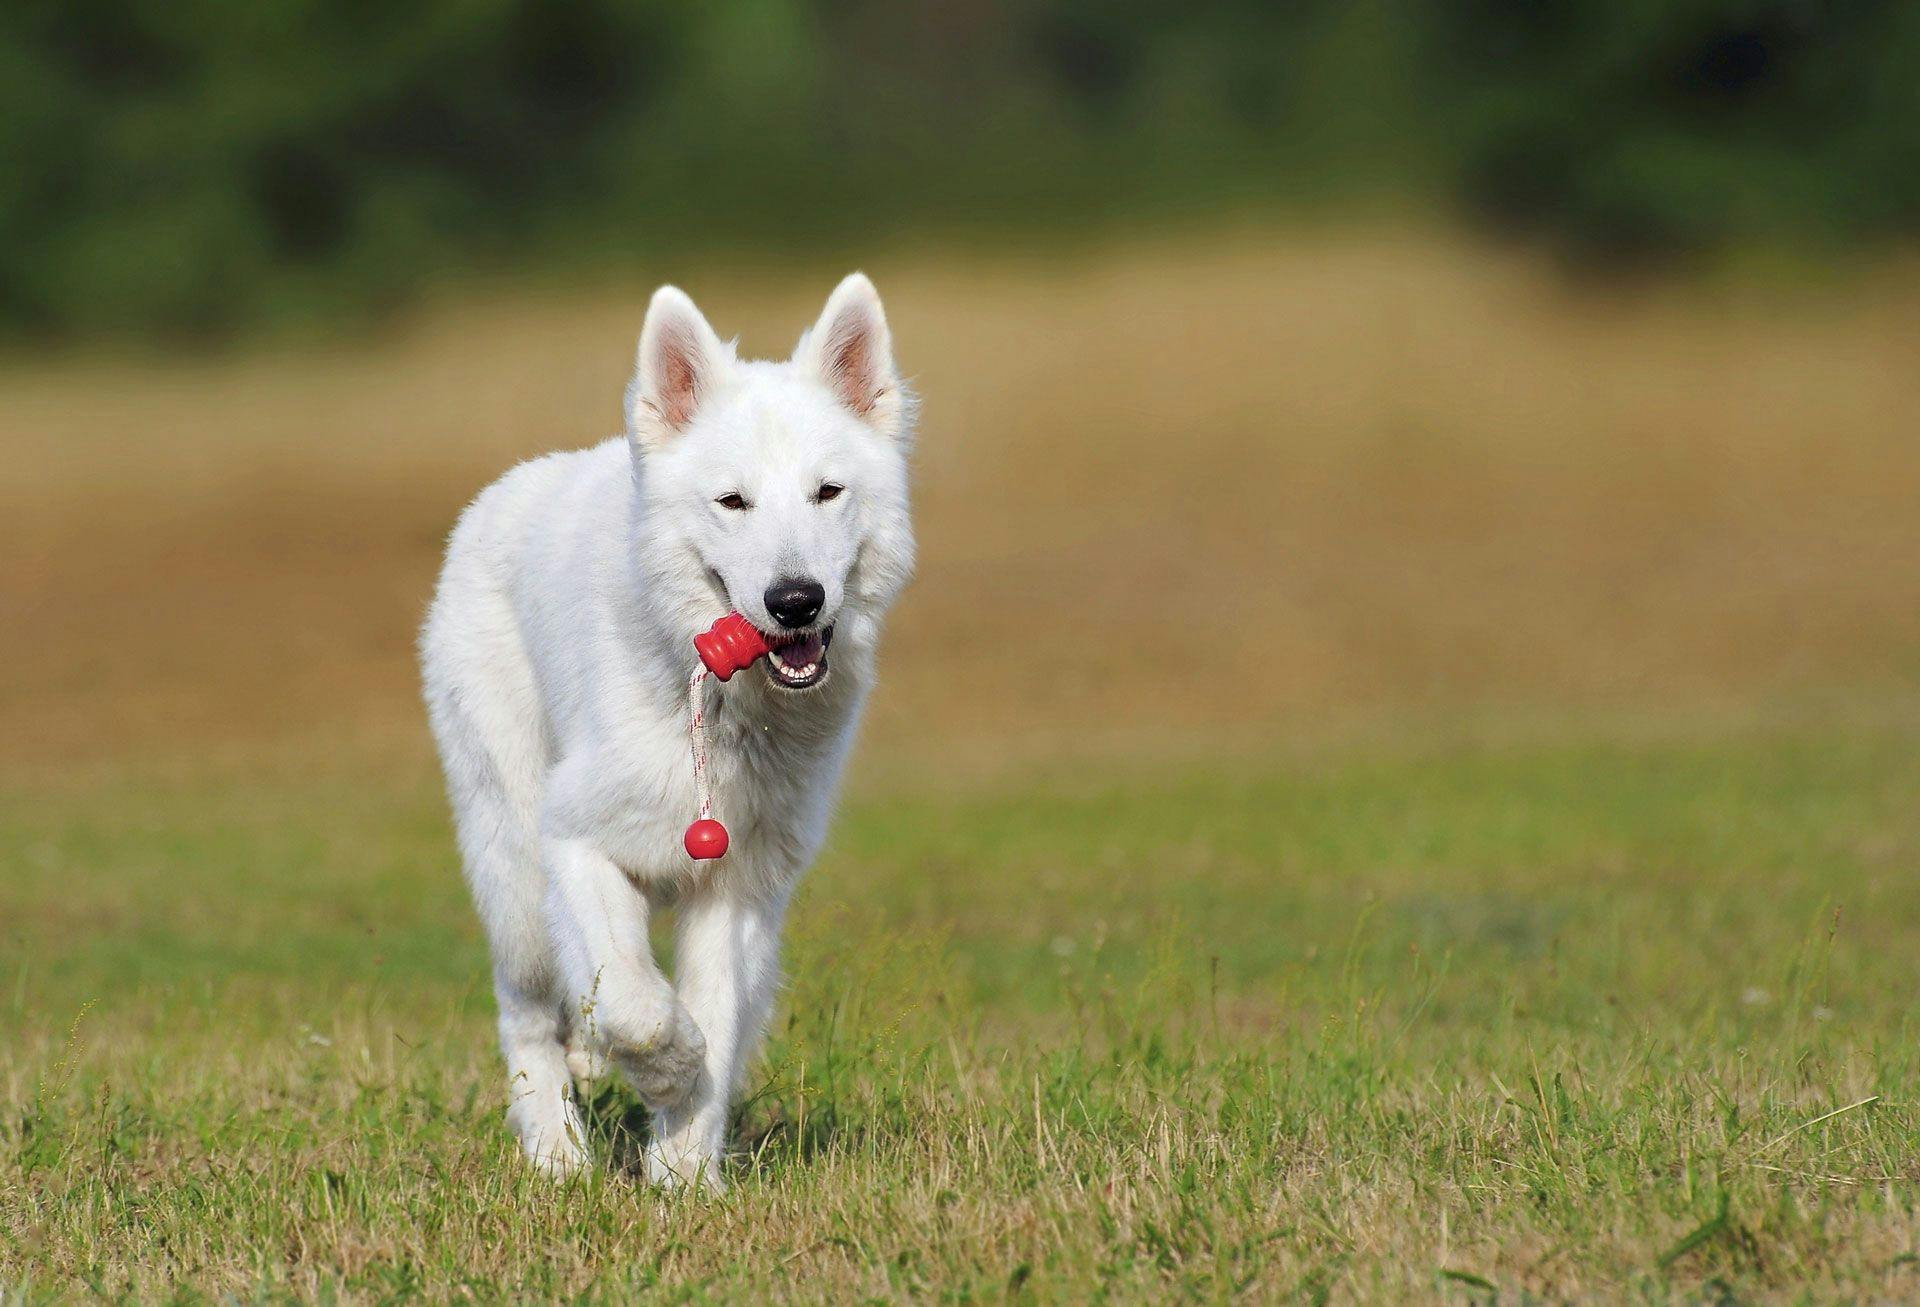 a white dog holding a red toy in its mouth and walking on the grass